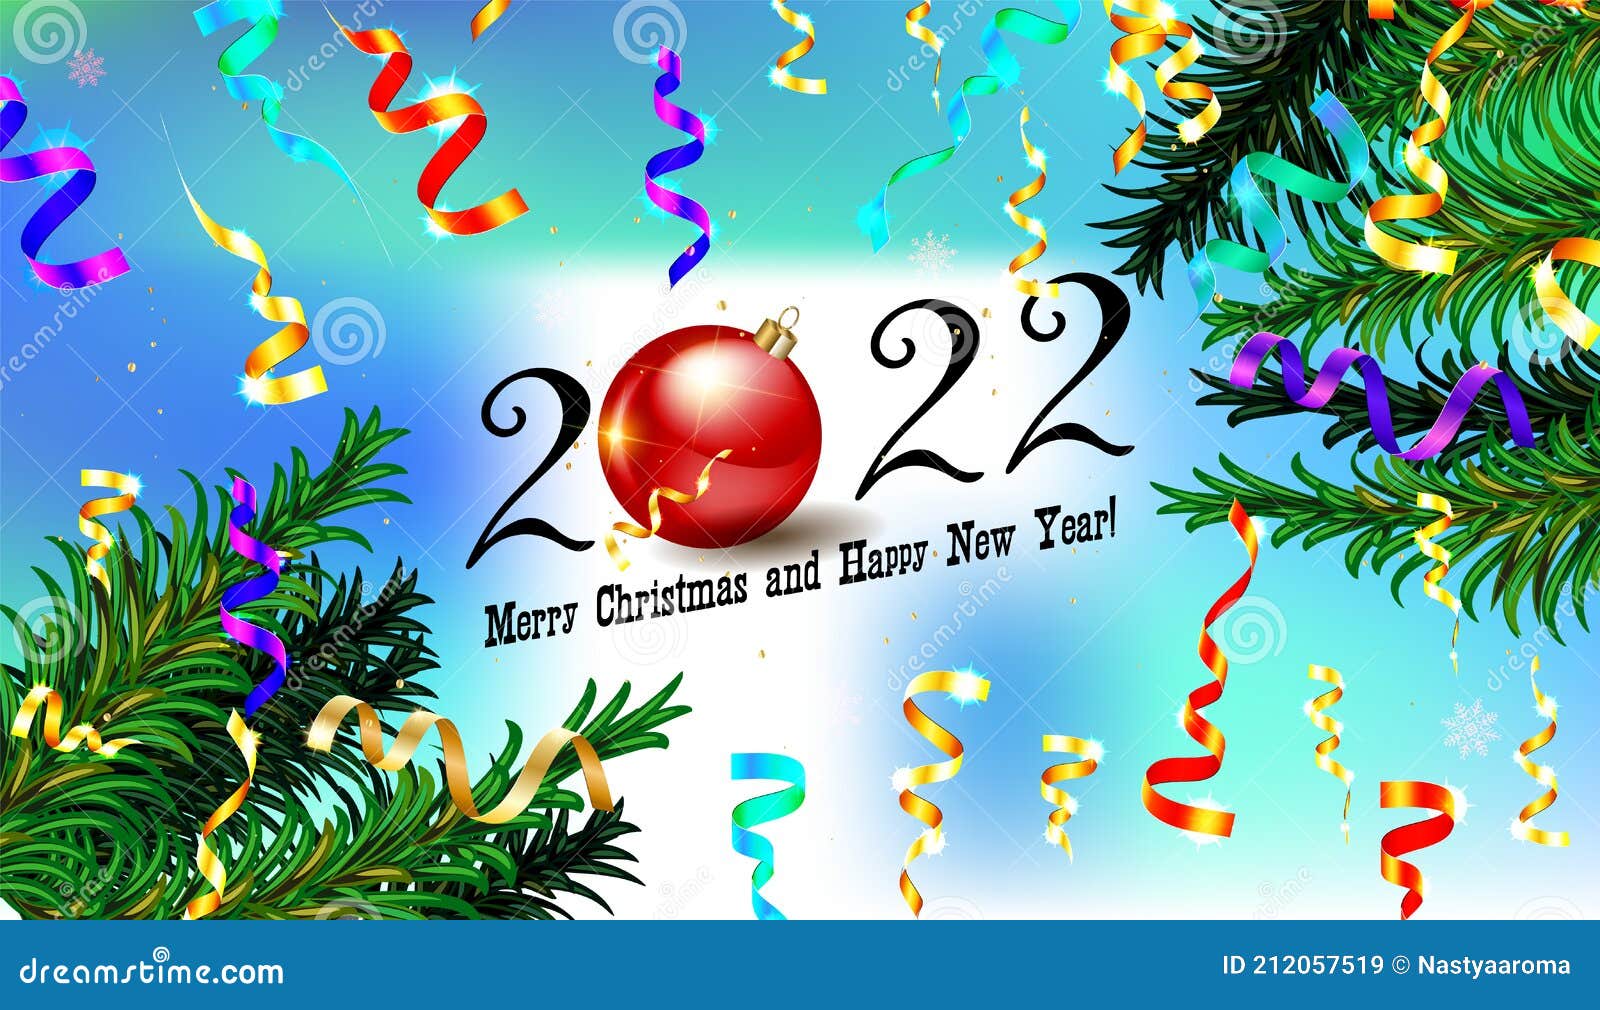 Merry Christmas And Happy New Year 2022 Download